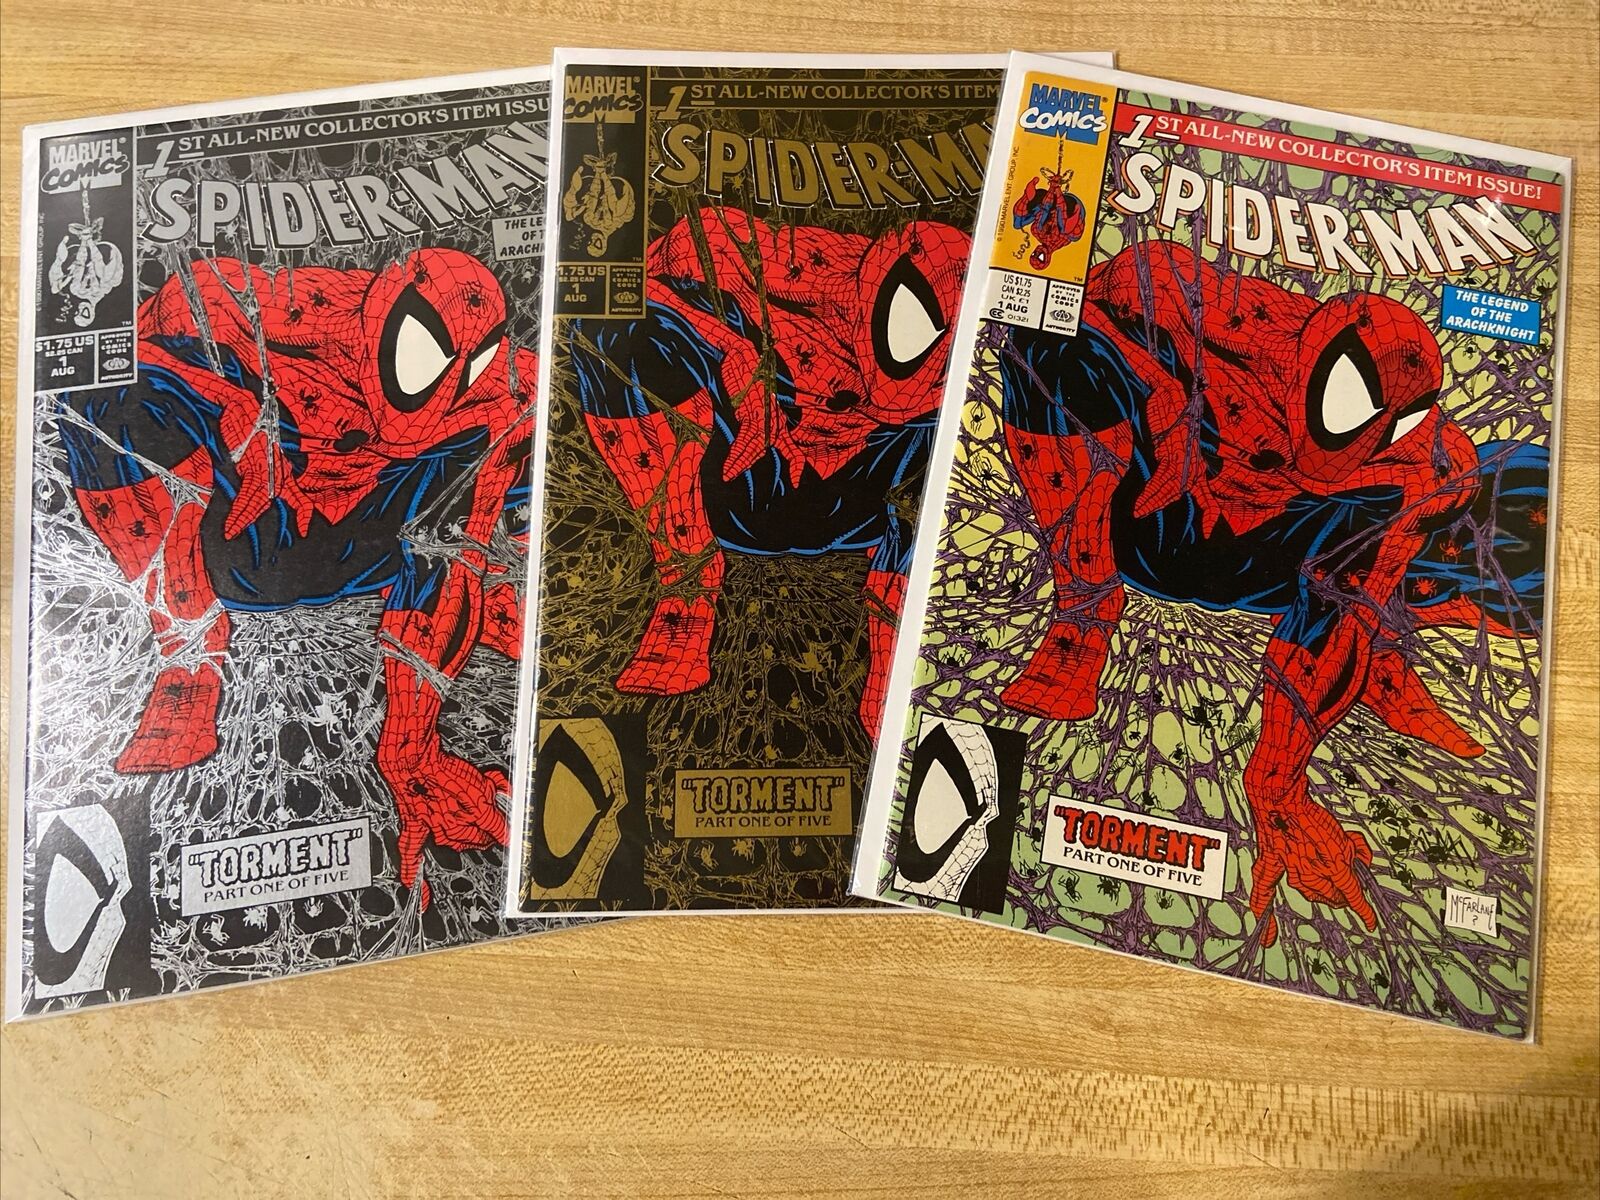 🔥 SPIDER-MAN 1 REGULAR SILVER AND GOLD EDITIONS BY TODD MCFARLANE VF/NM LOT